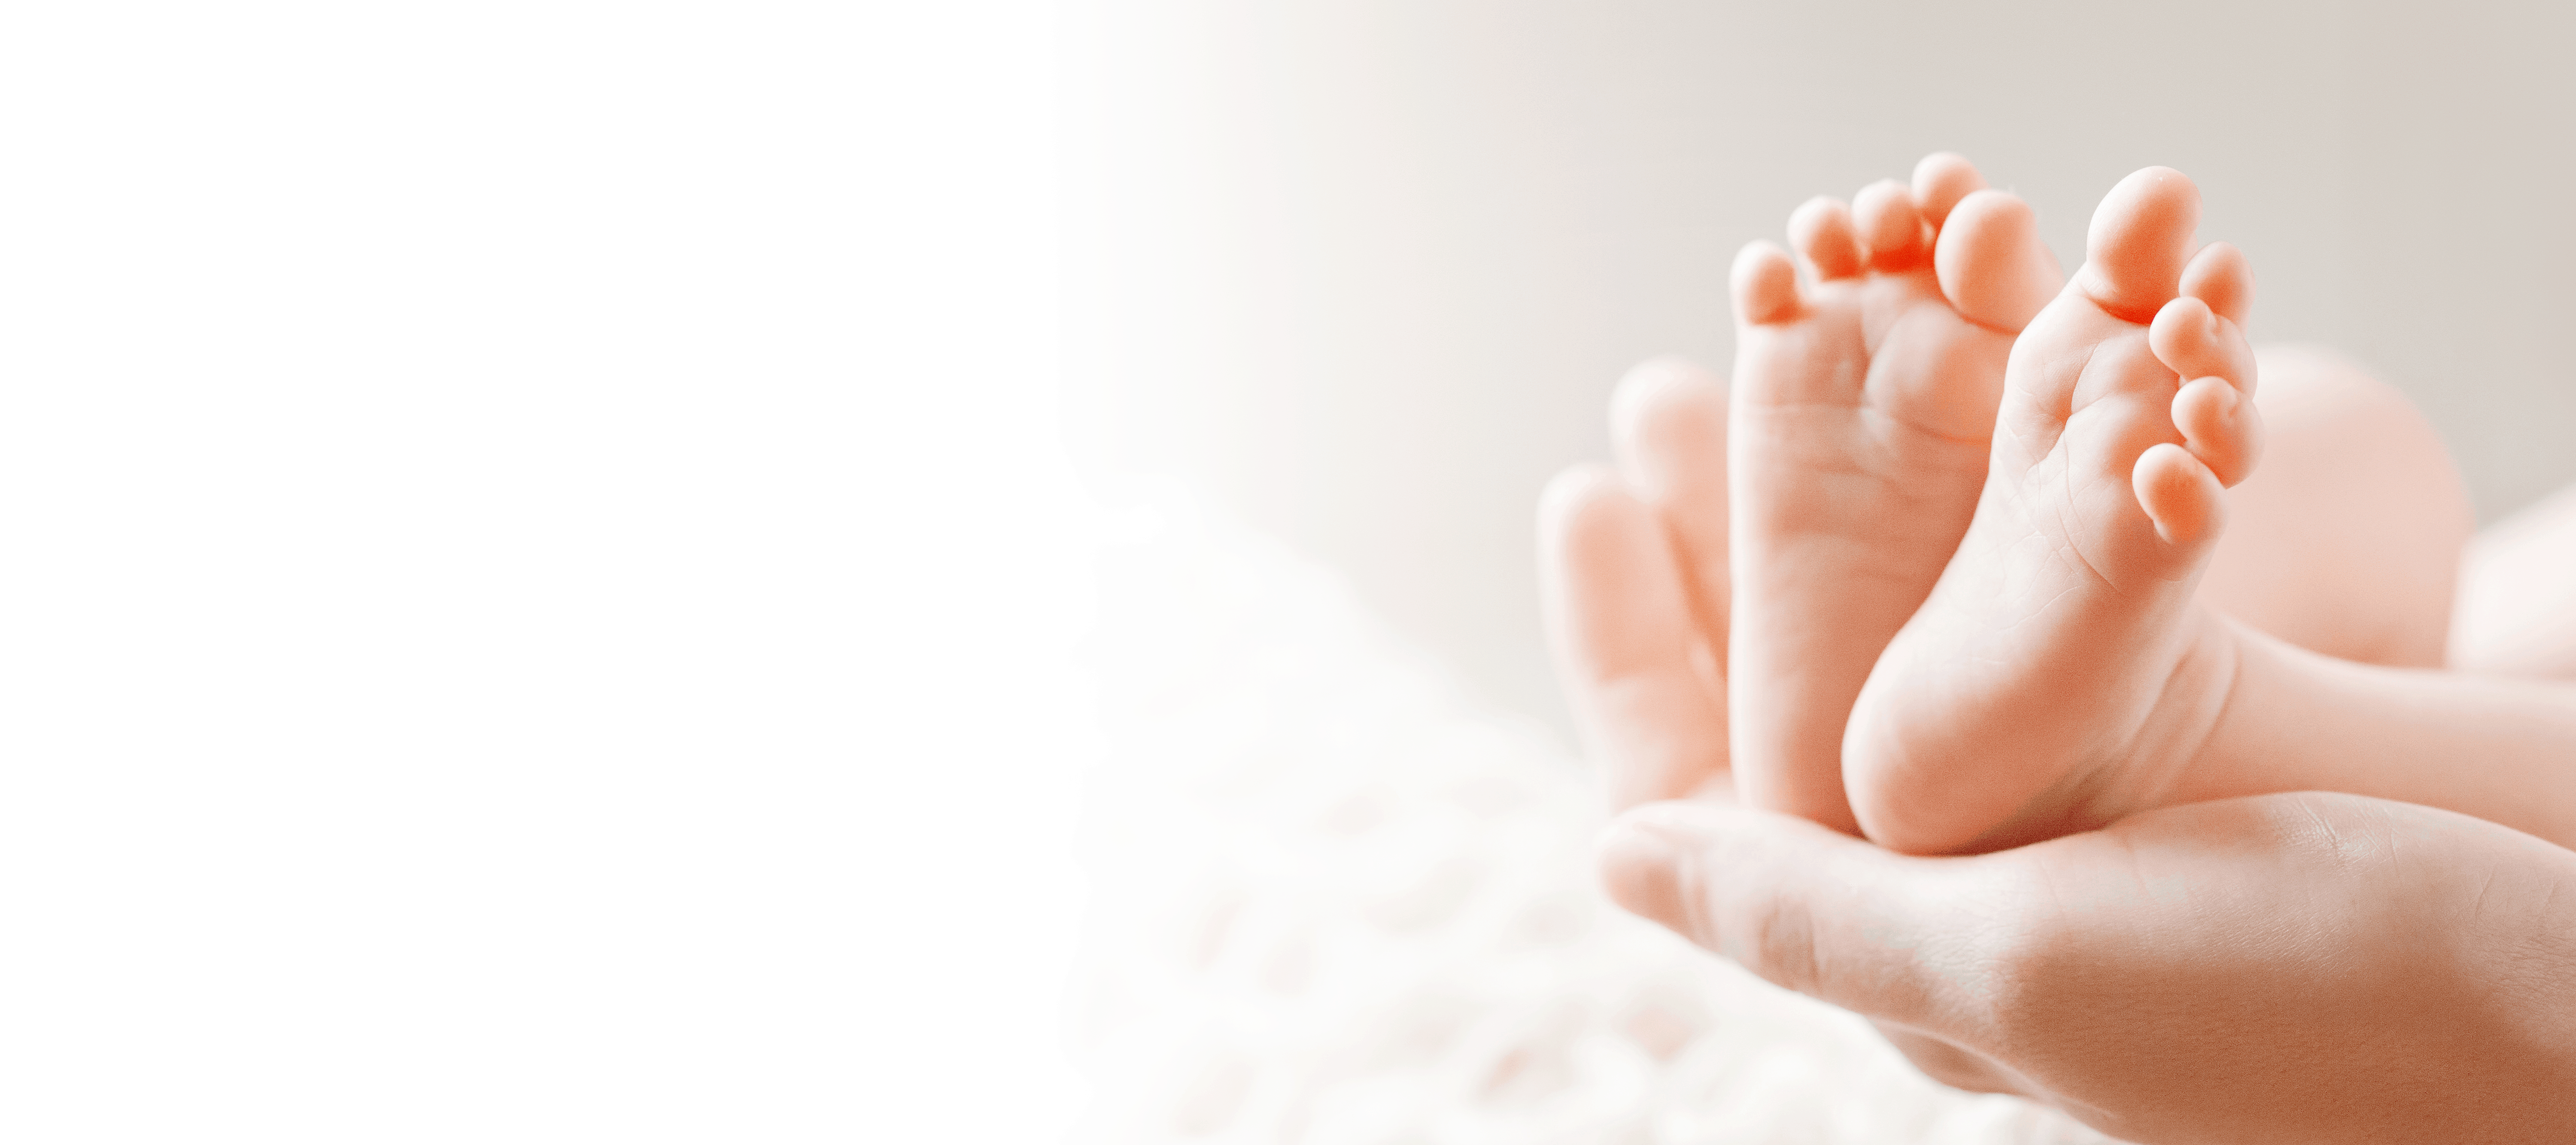 Small baby's feet held in parent's hands on white background